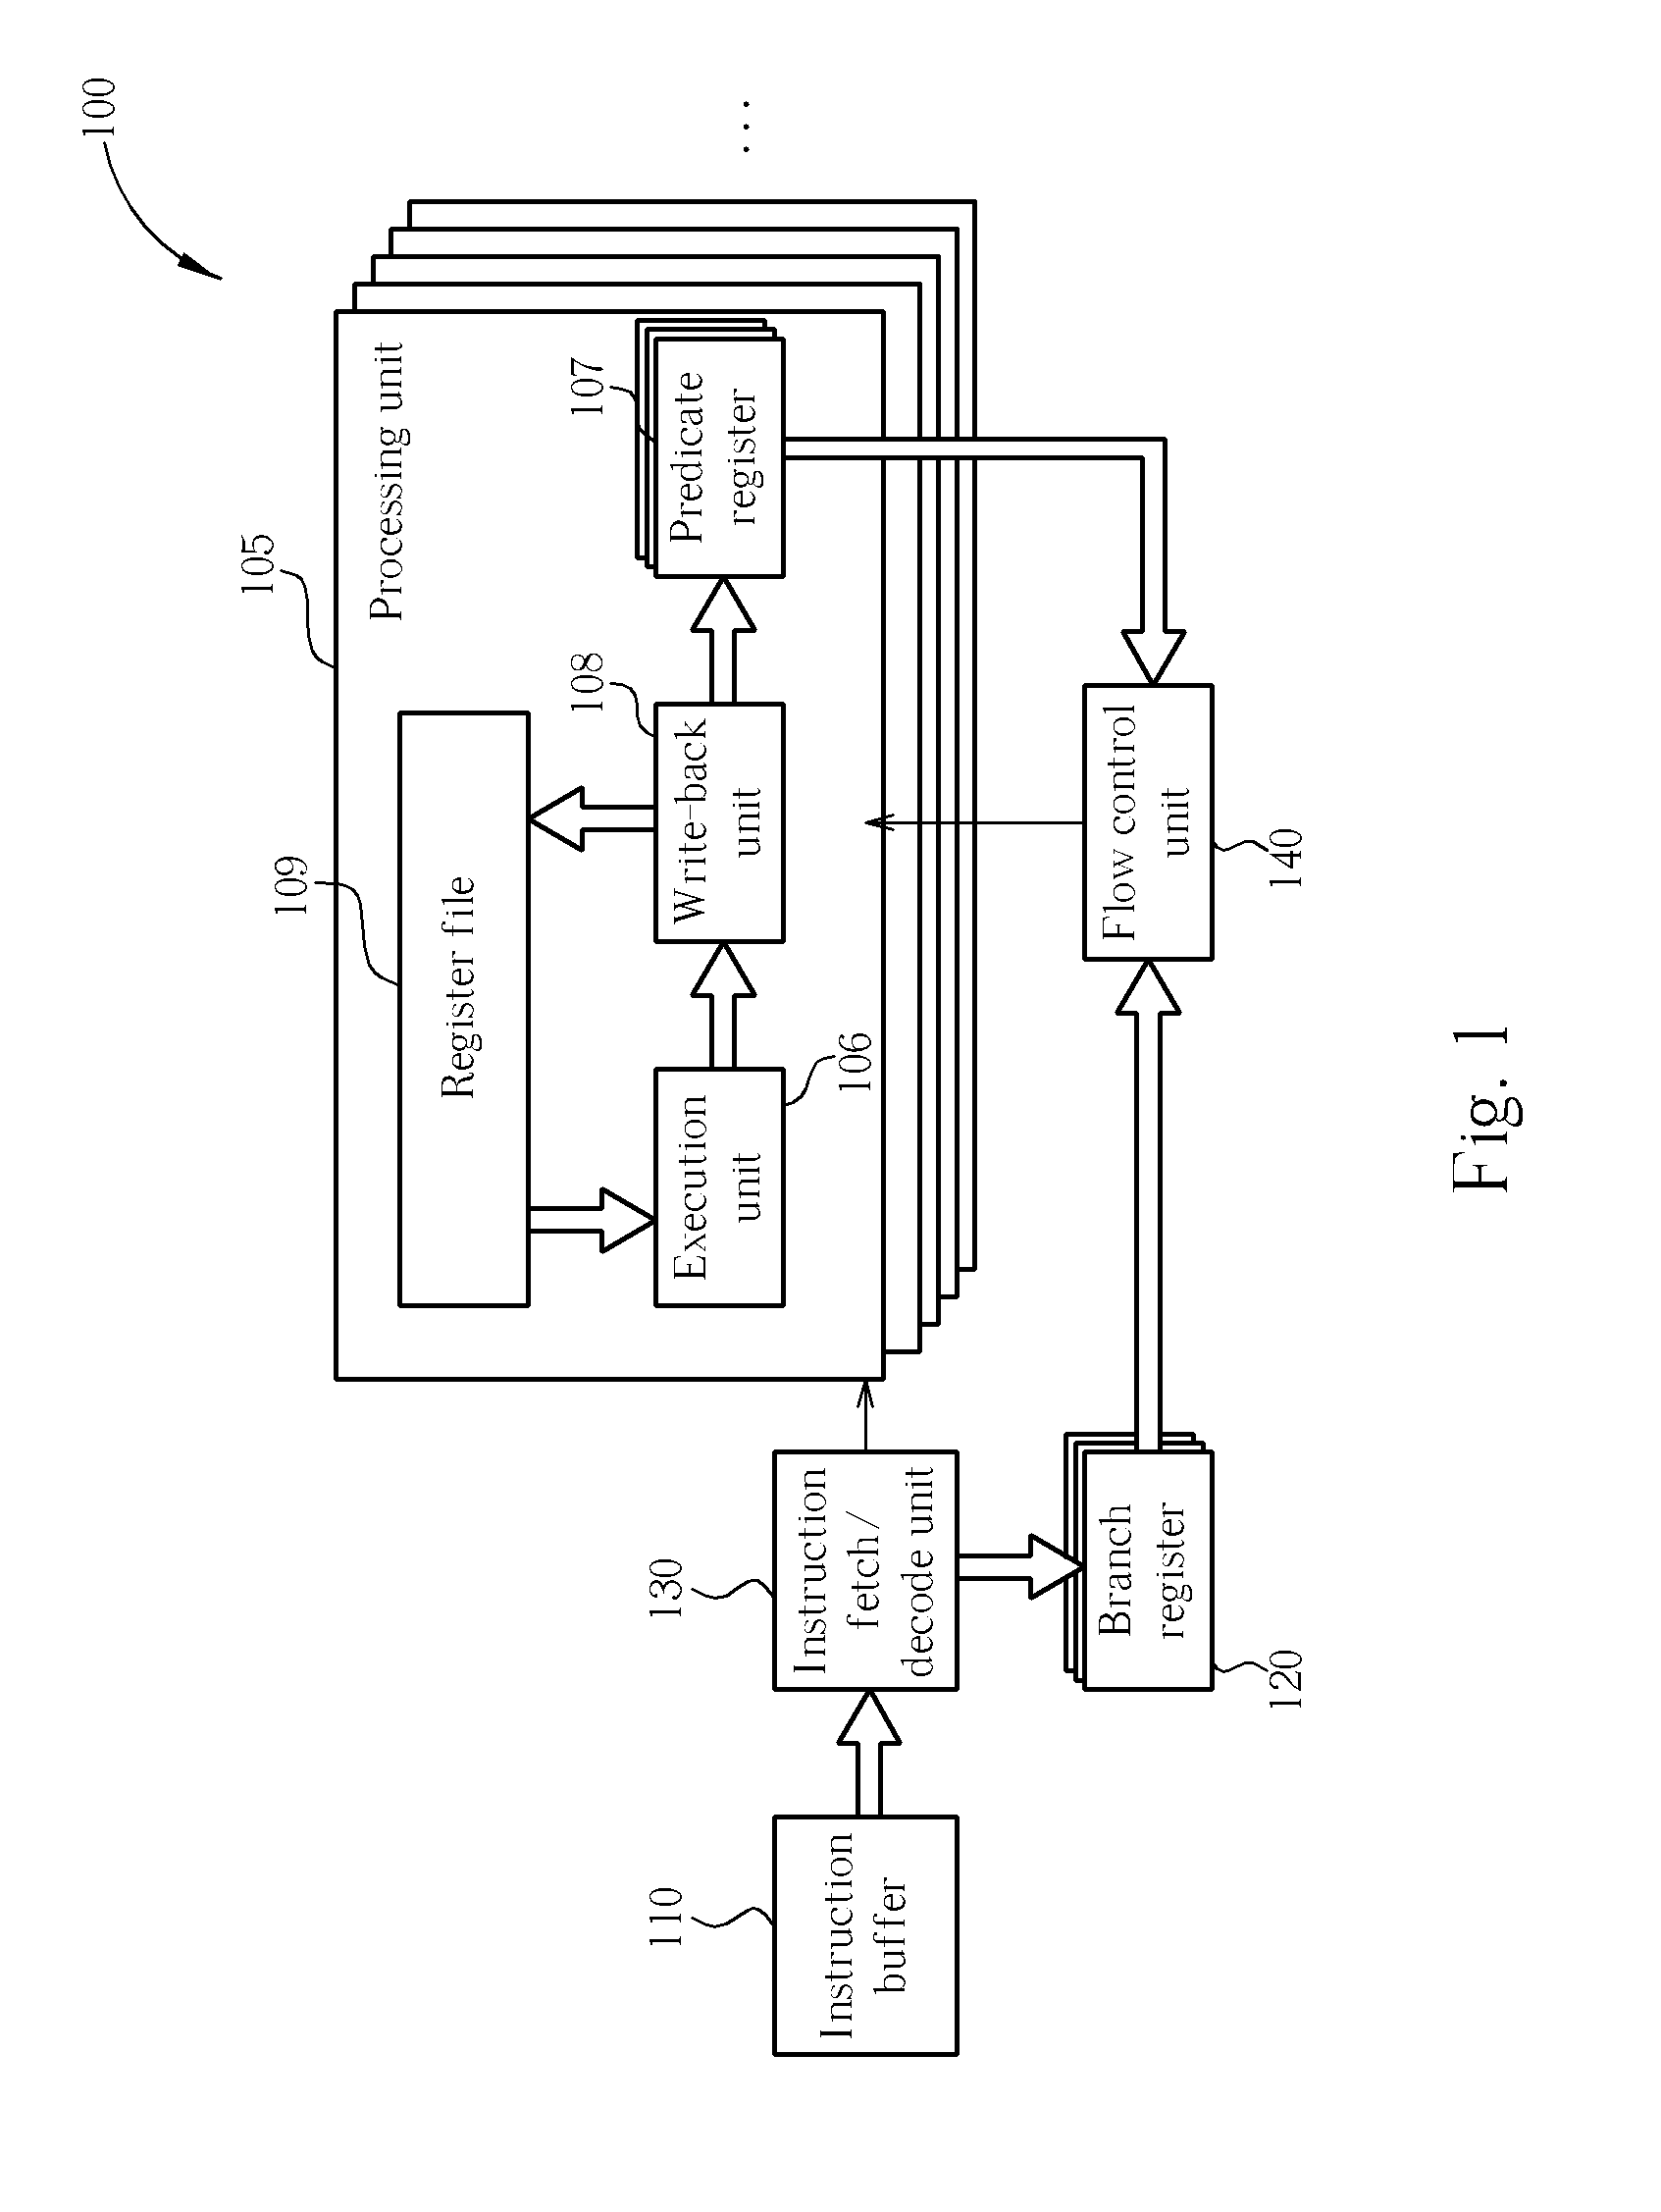 Method and processing system for nested flow control utilizing predicate register and branch register